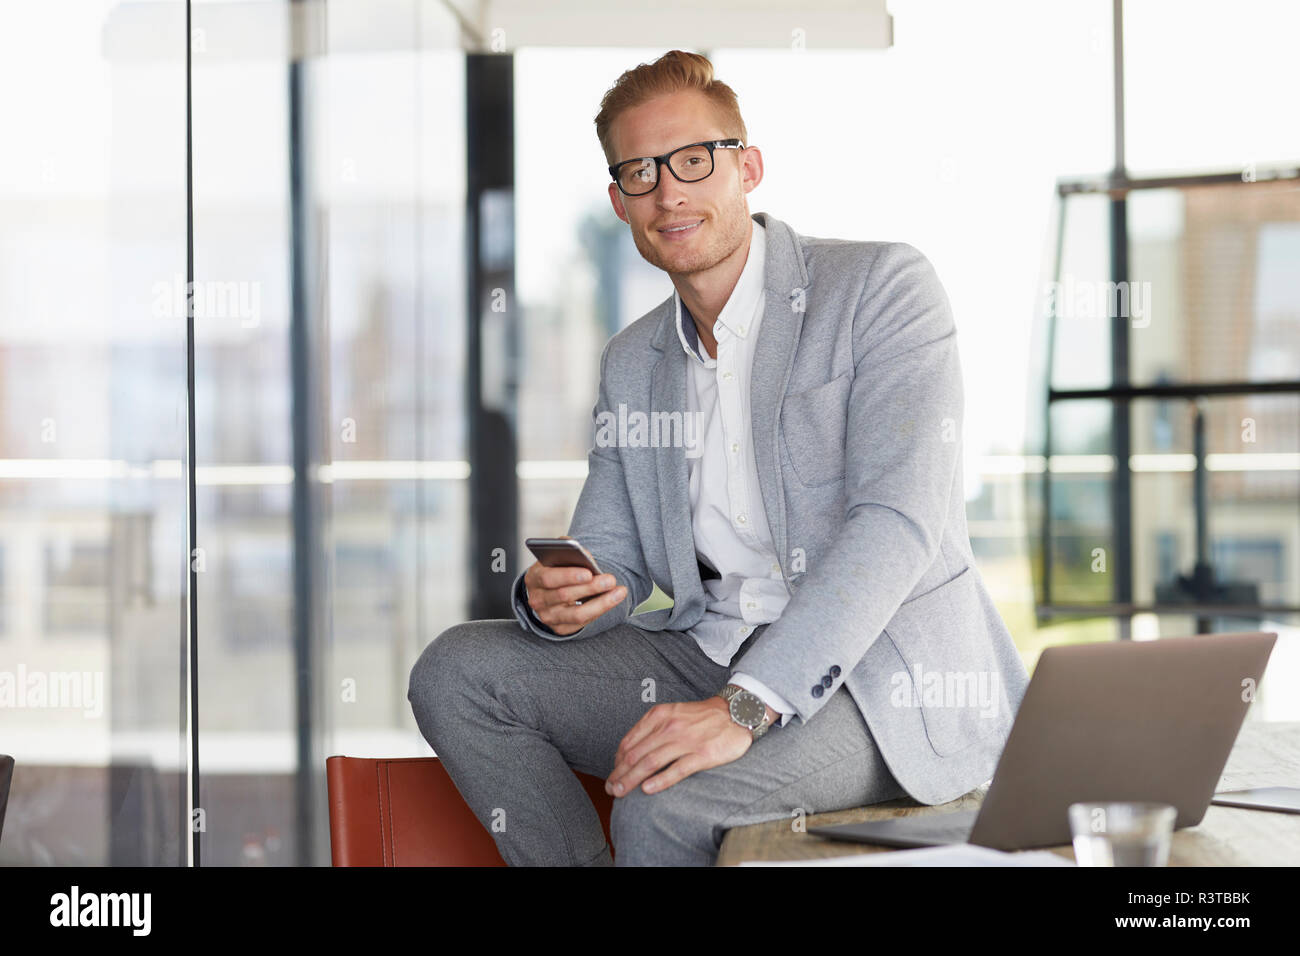 Portrait of smiling businessman with laptop and cell phone sitting on desk in office Banque D'Images